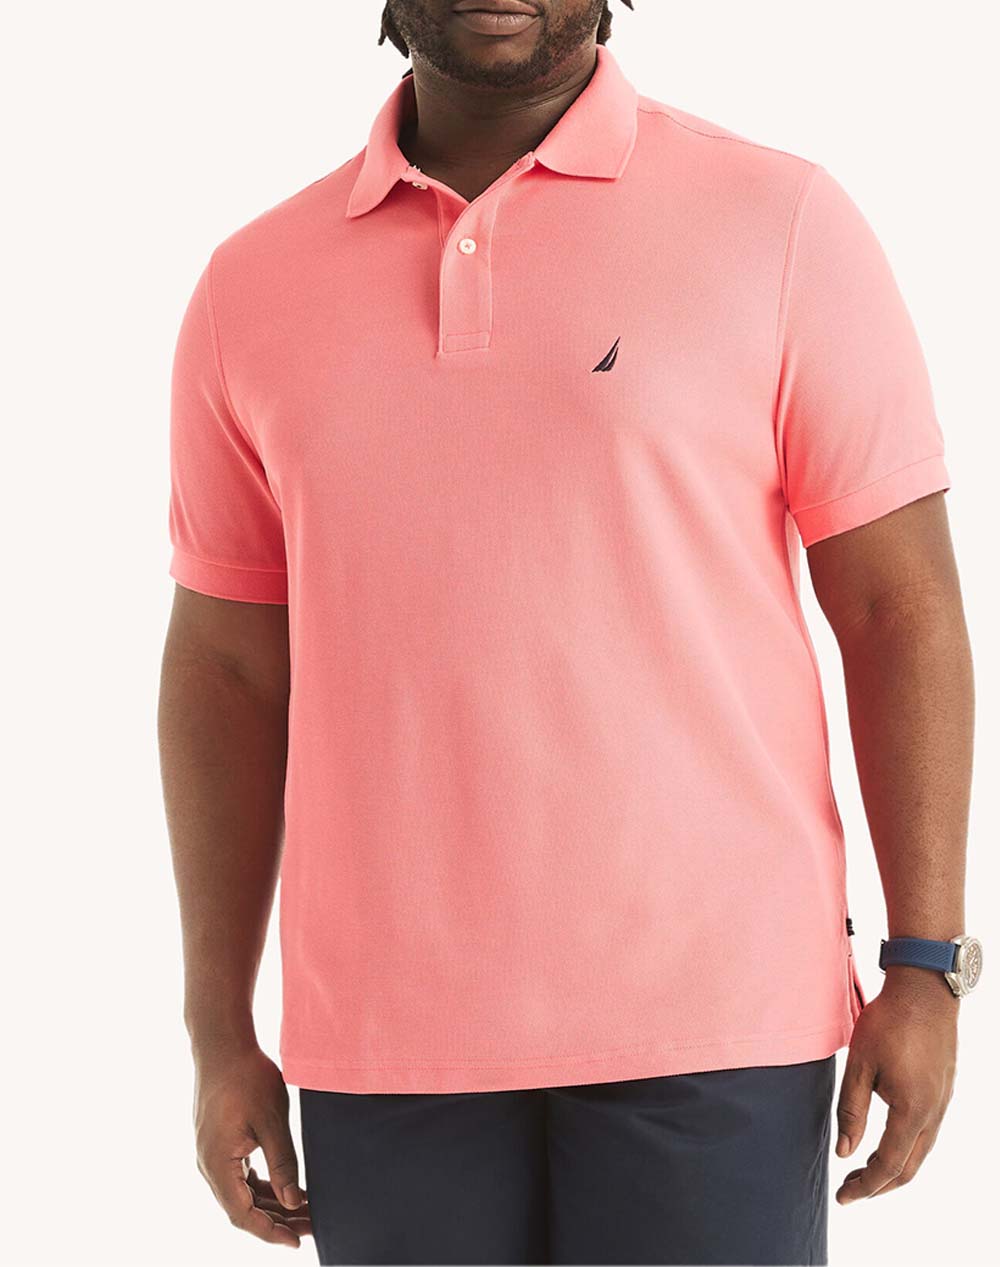 NAUTICA ΜΠΛΟΥΖΑ ΠΟΛΟ ΚΜ MENS S/S KNITTED POLO 3NCZ15101-6TH Coral